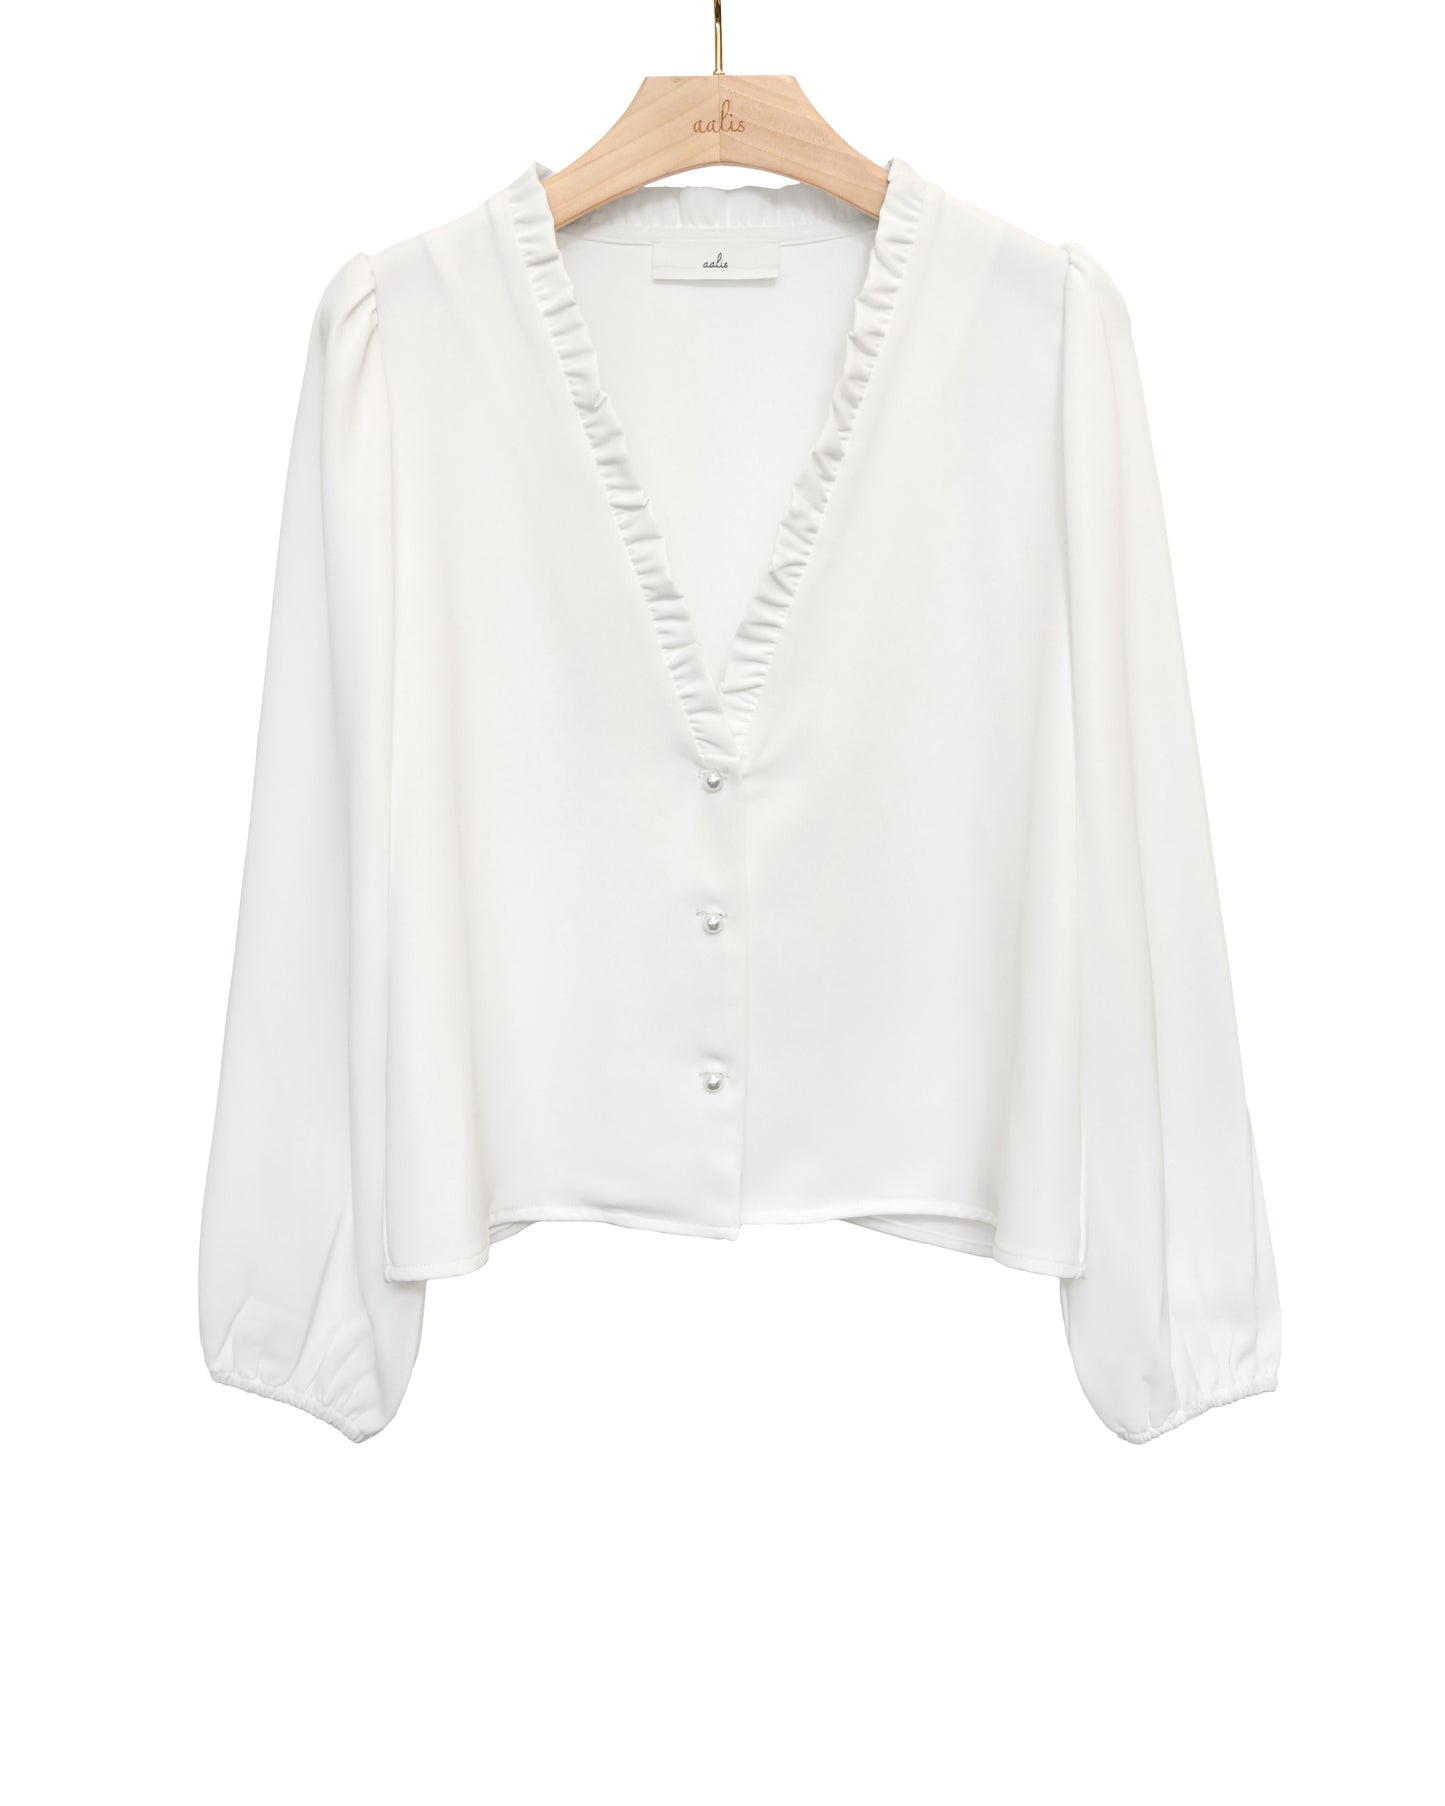 Load image into Gallery viewer, aalis TUTA ruffle trimmed collar pearl button jacket (White)
